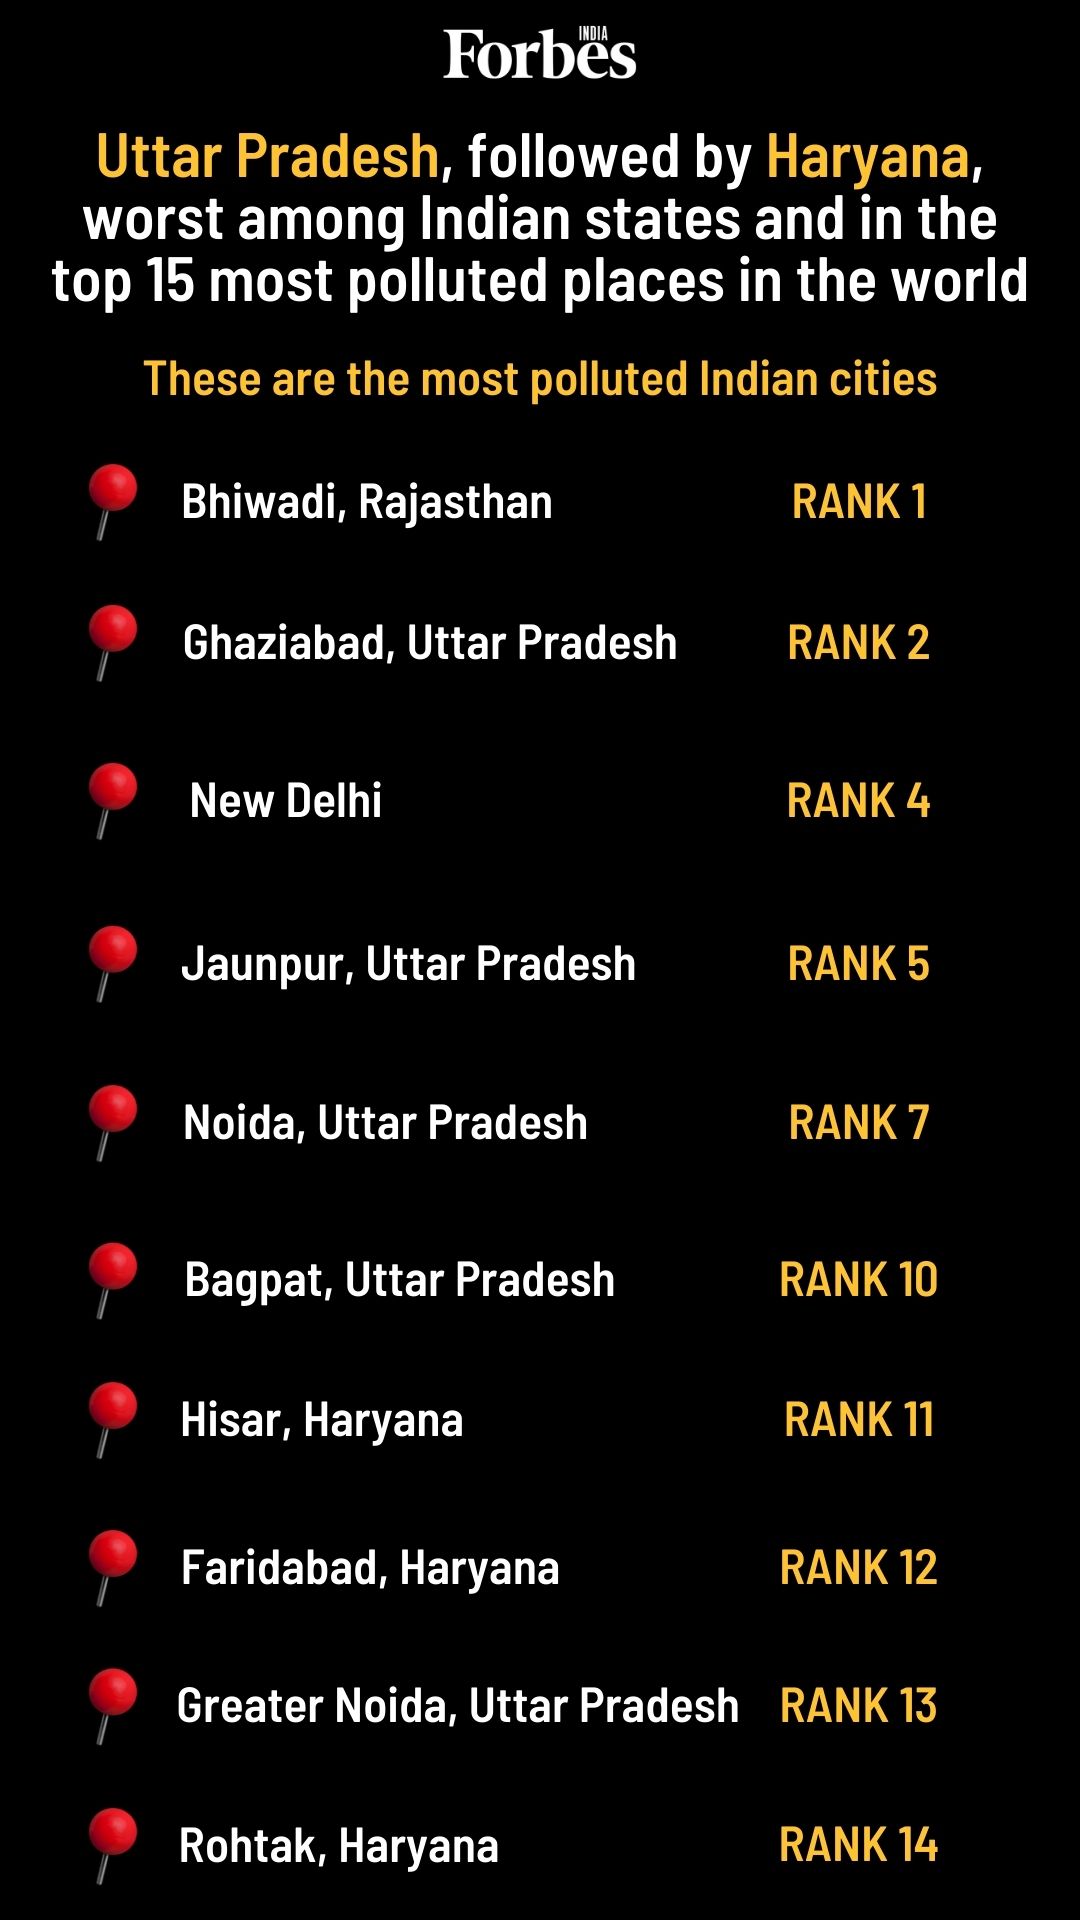 63 Indian cities among world's most polluted; India 5th among most-polluted countries